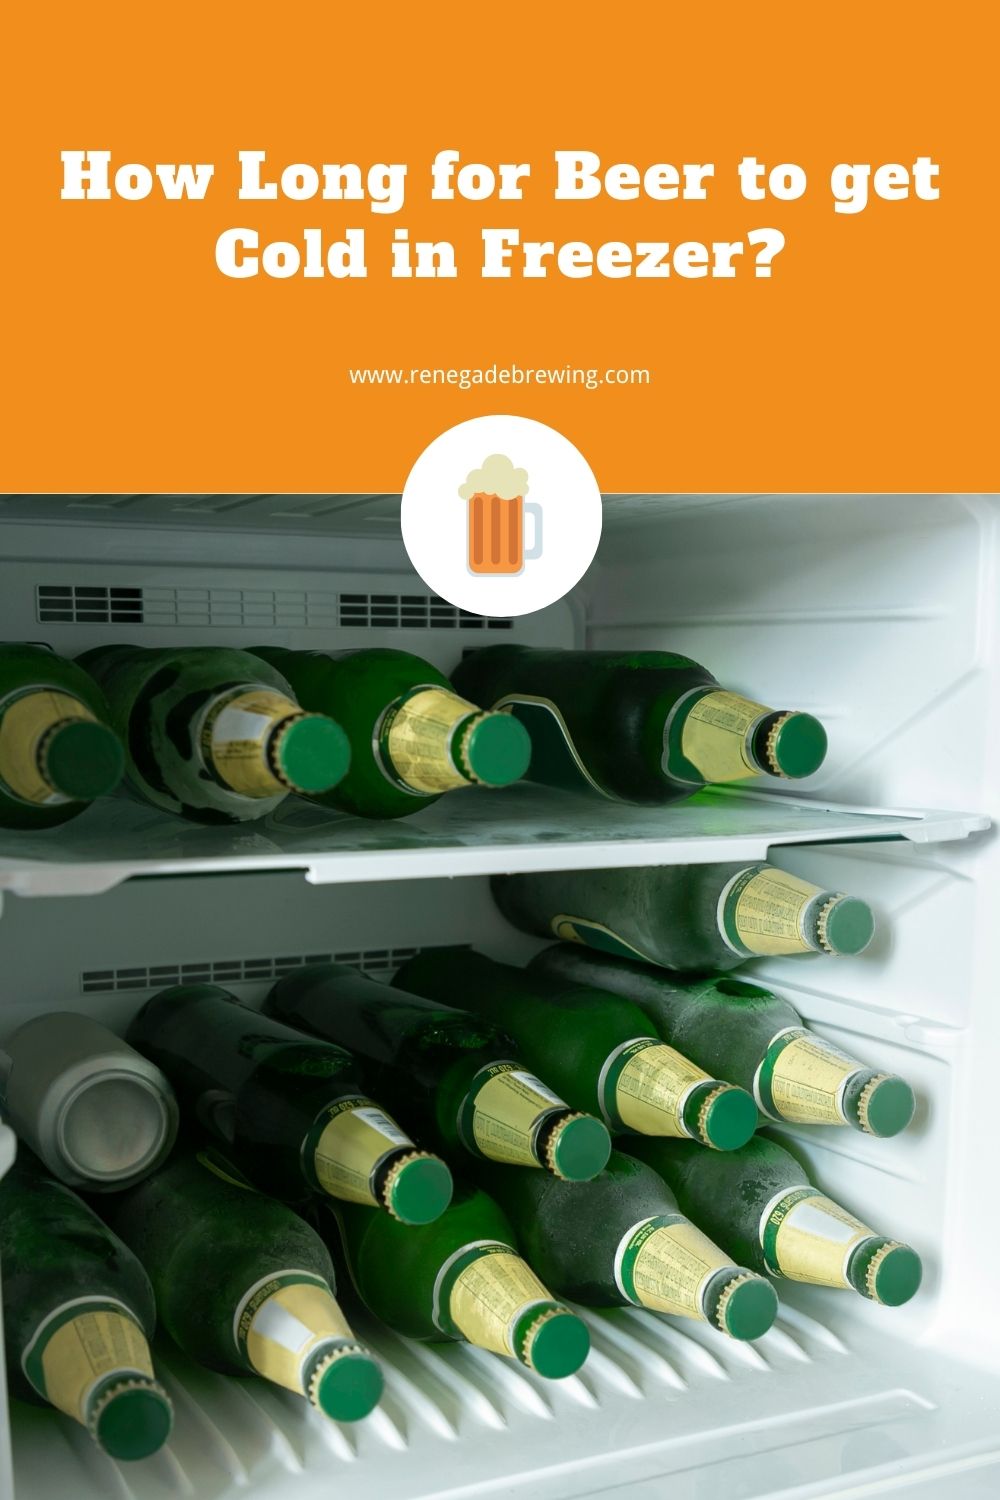 How Long for Beer to get Cold in Freezer (5 Tips to Fast) 2